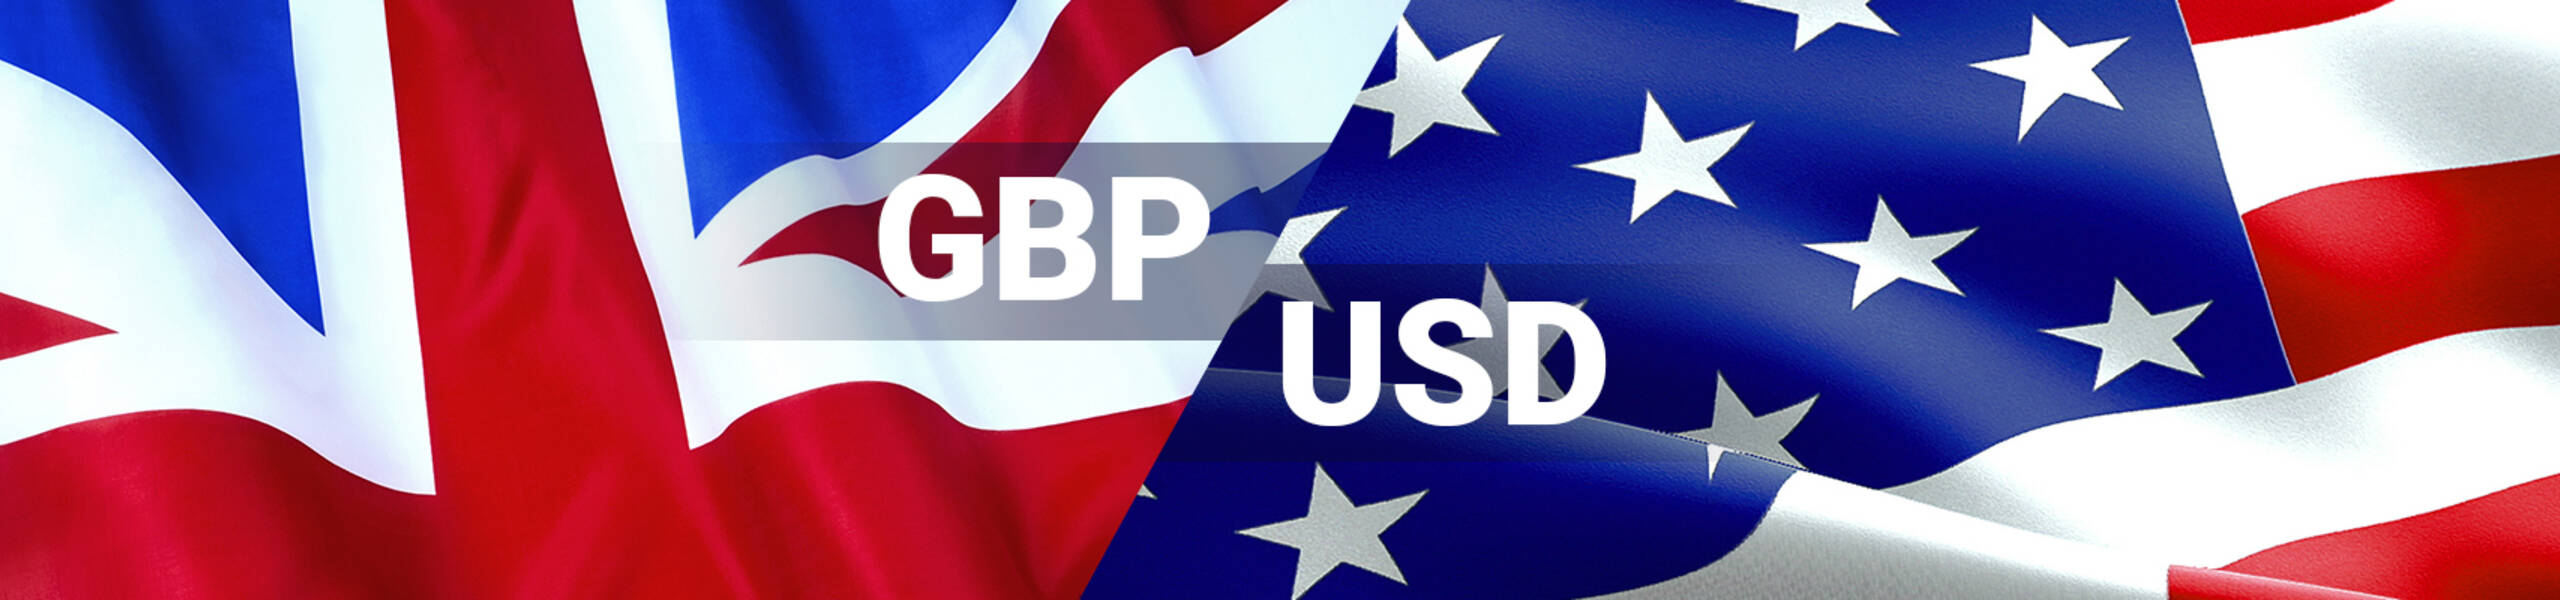 GBP/USD: market waiting for the Bulls